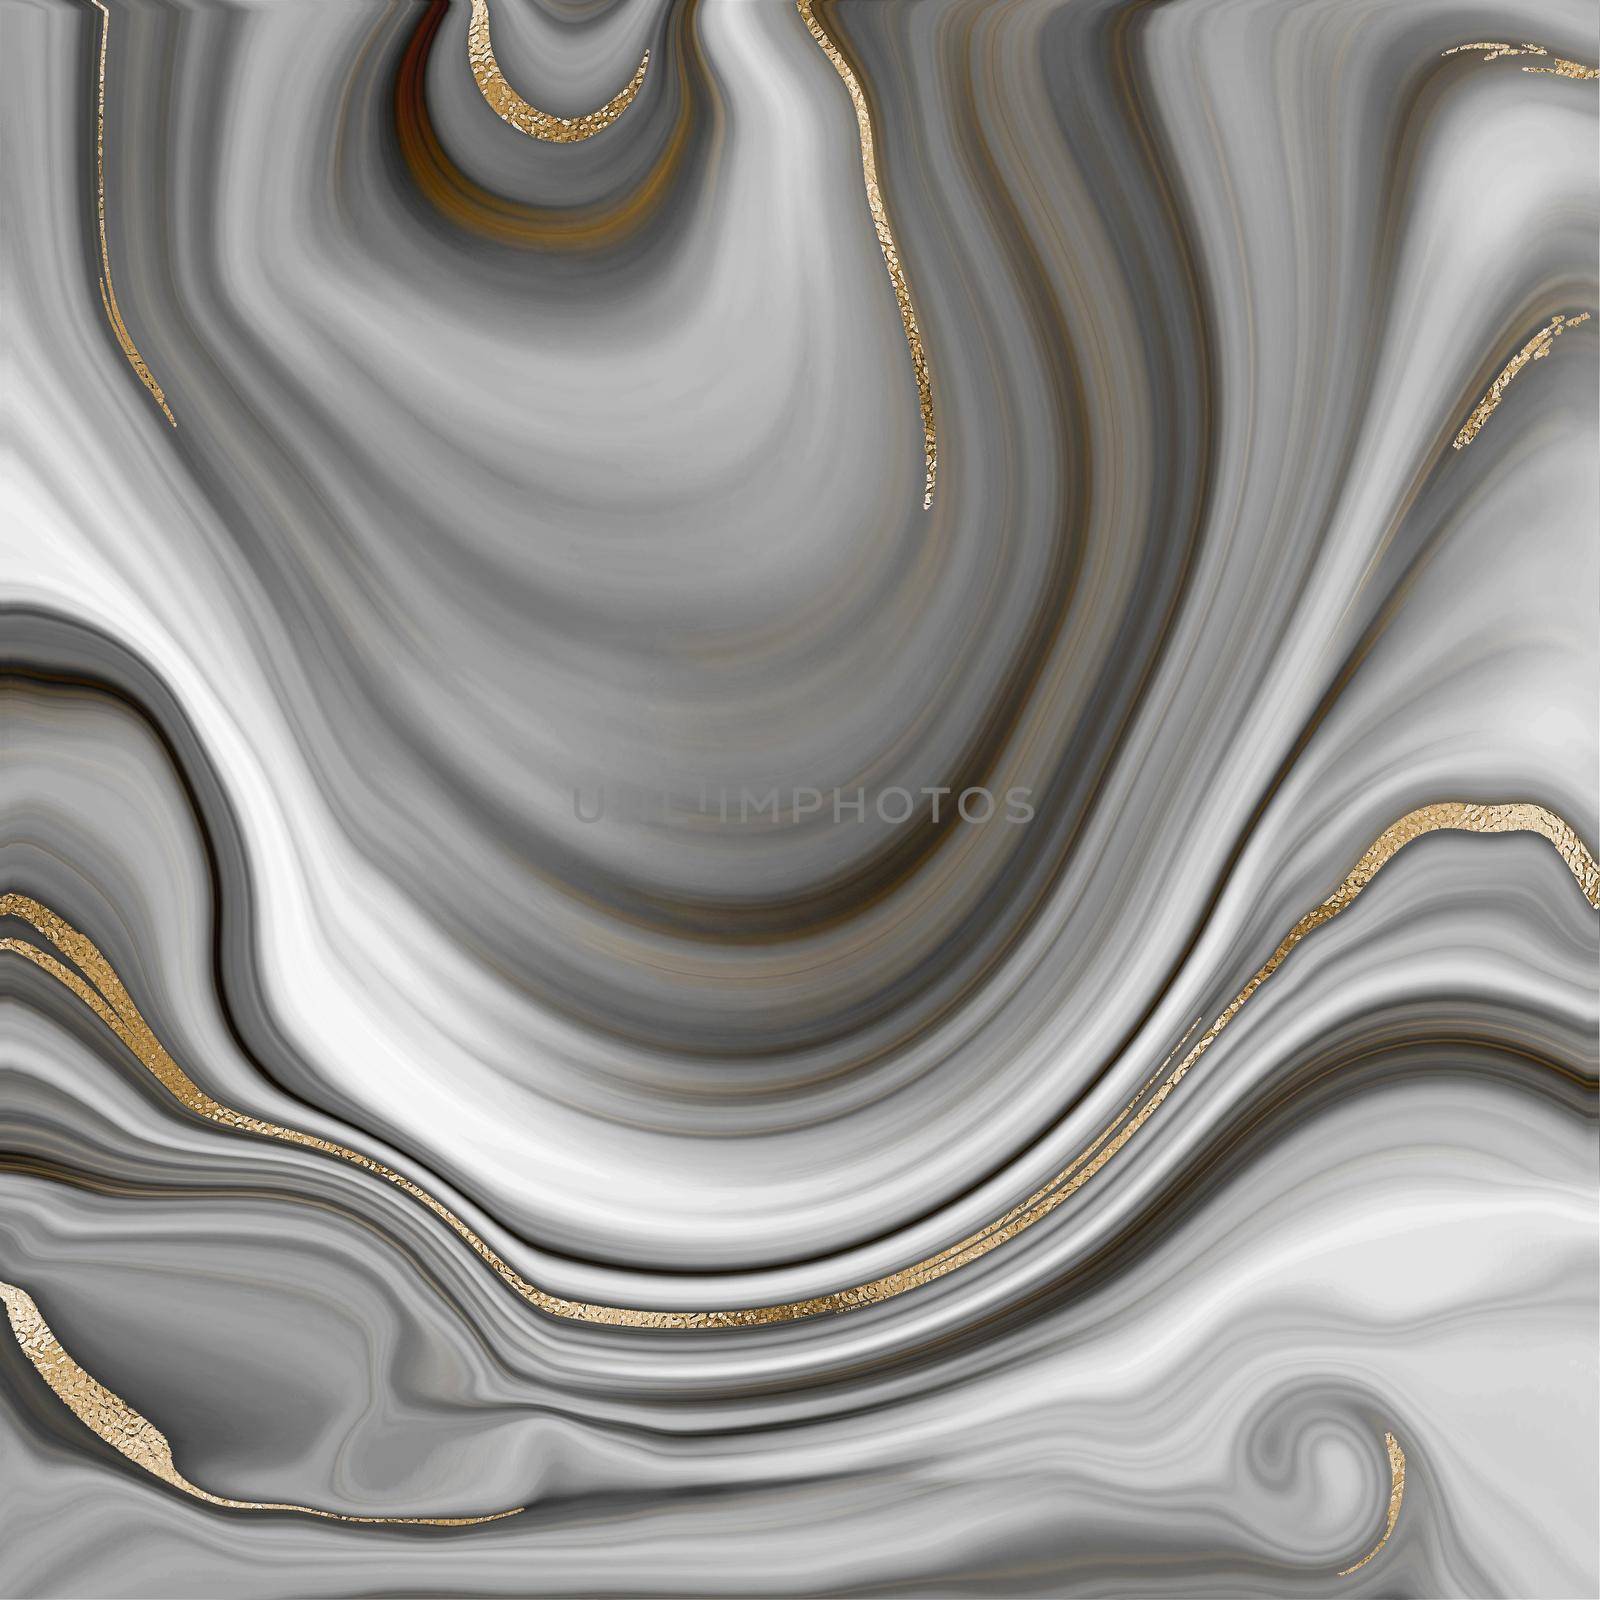 Liquid abstract marble agate background with gold glitter splatter texture. Fluid marbling effect with gold vein. Illustration